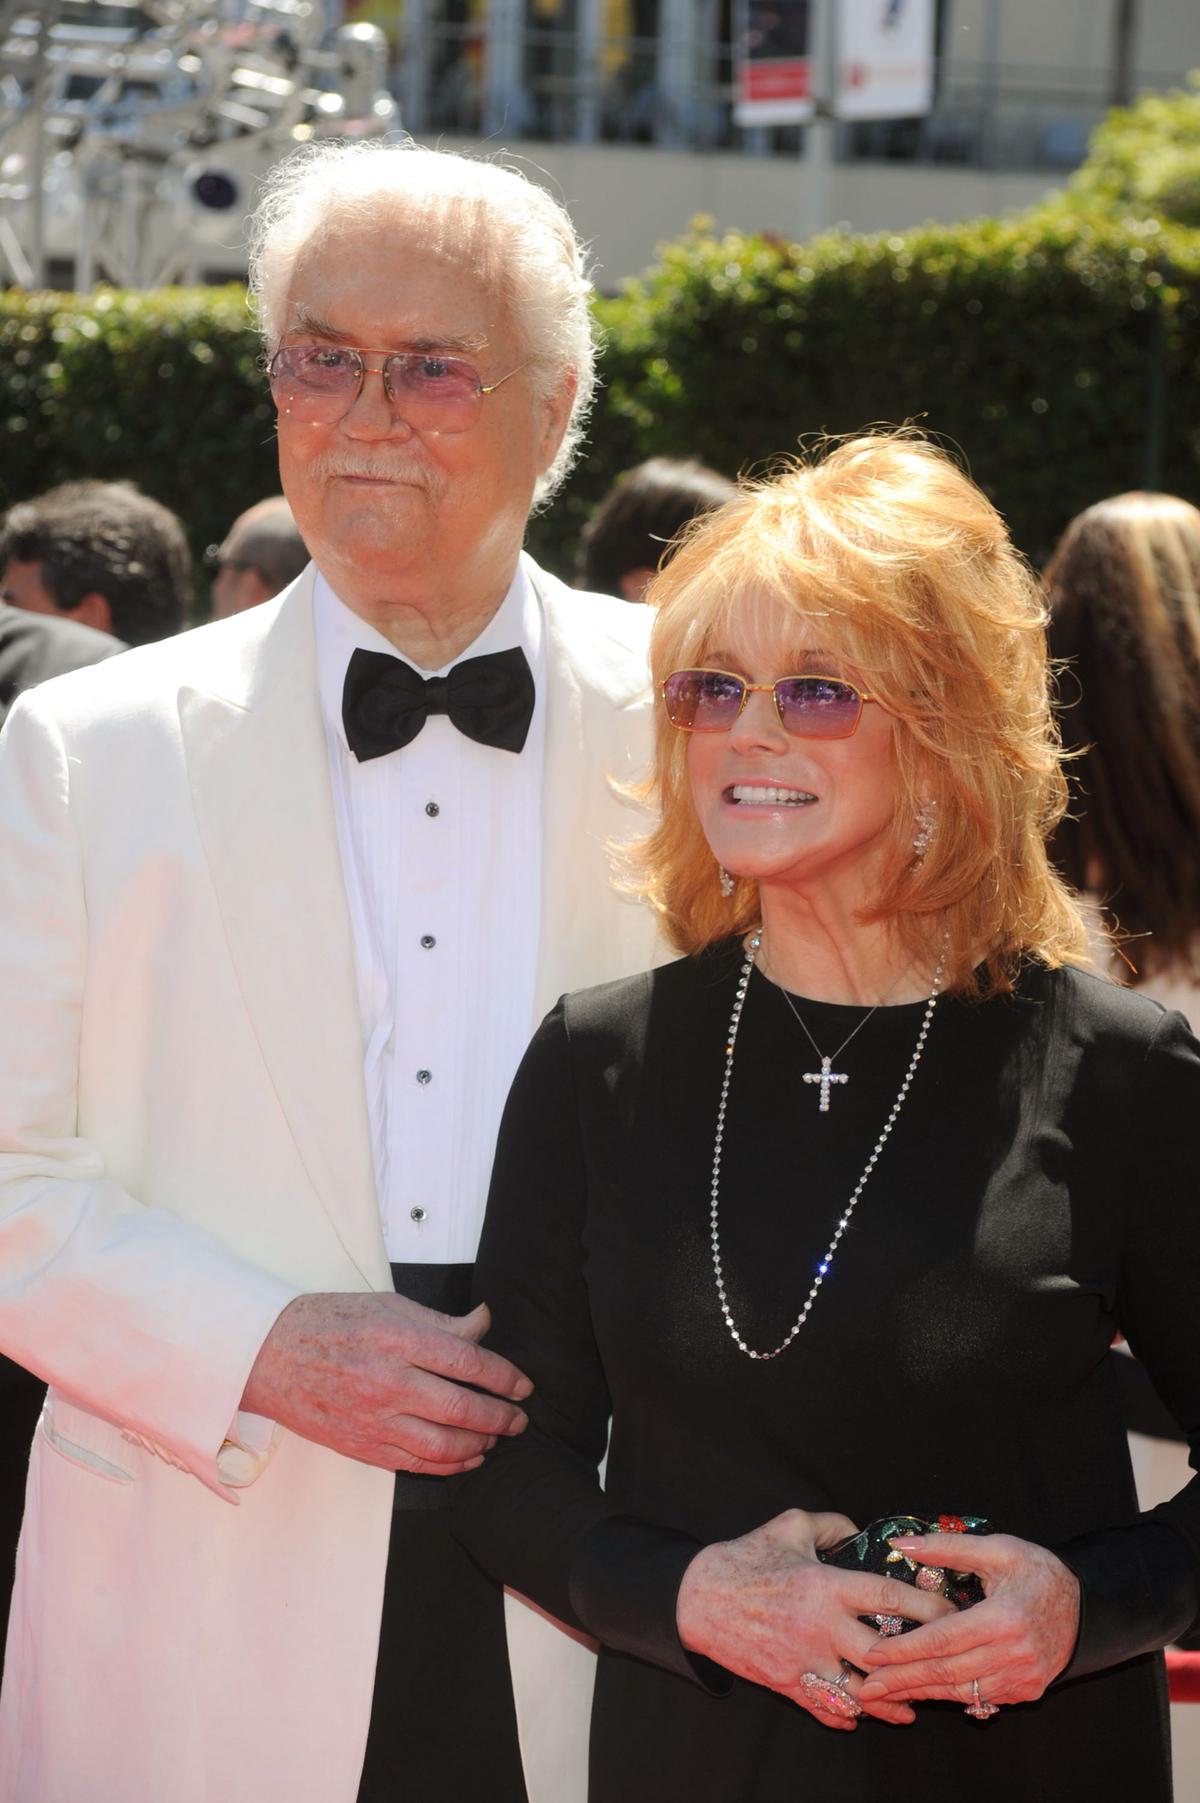 Ann-Margret and her husband, Roger Smith, arrive at the 62nd Primetime Creative Arts Emmy Awards at the Nokia Theater in Los Angeles, California, on Aug. 21, 2010. (Frazer Harrison/Getty Images)